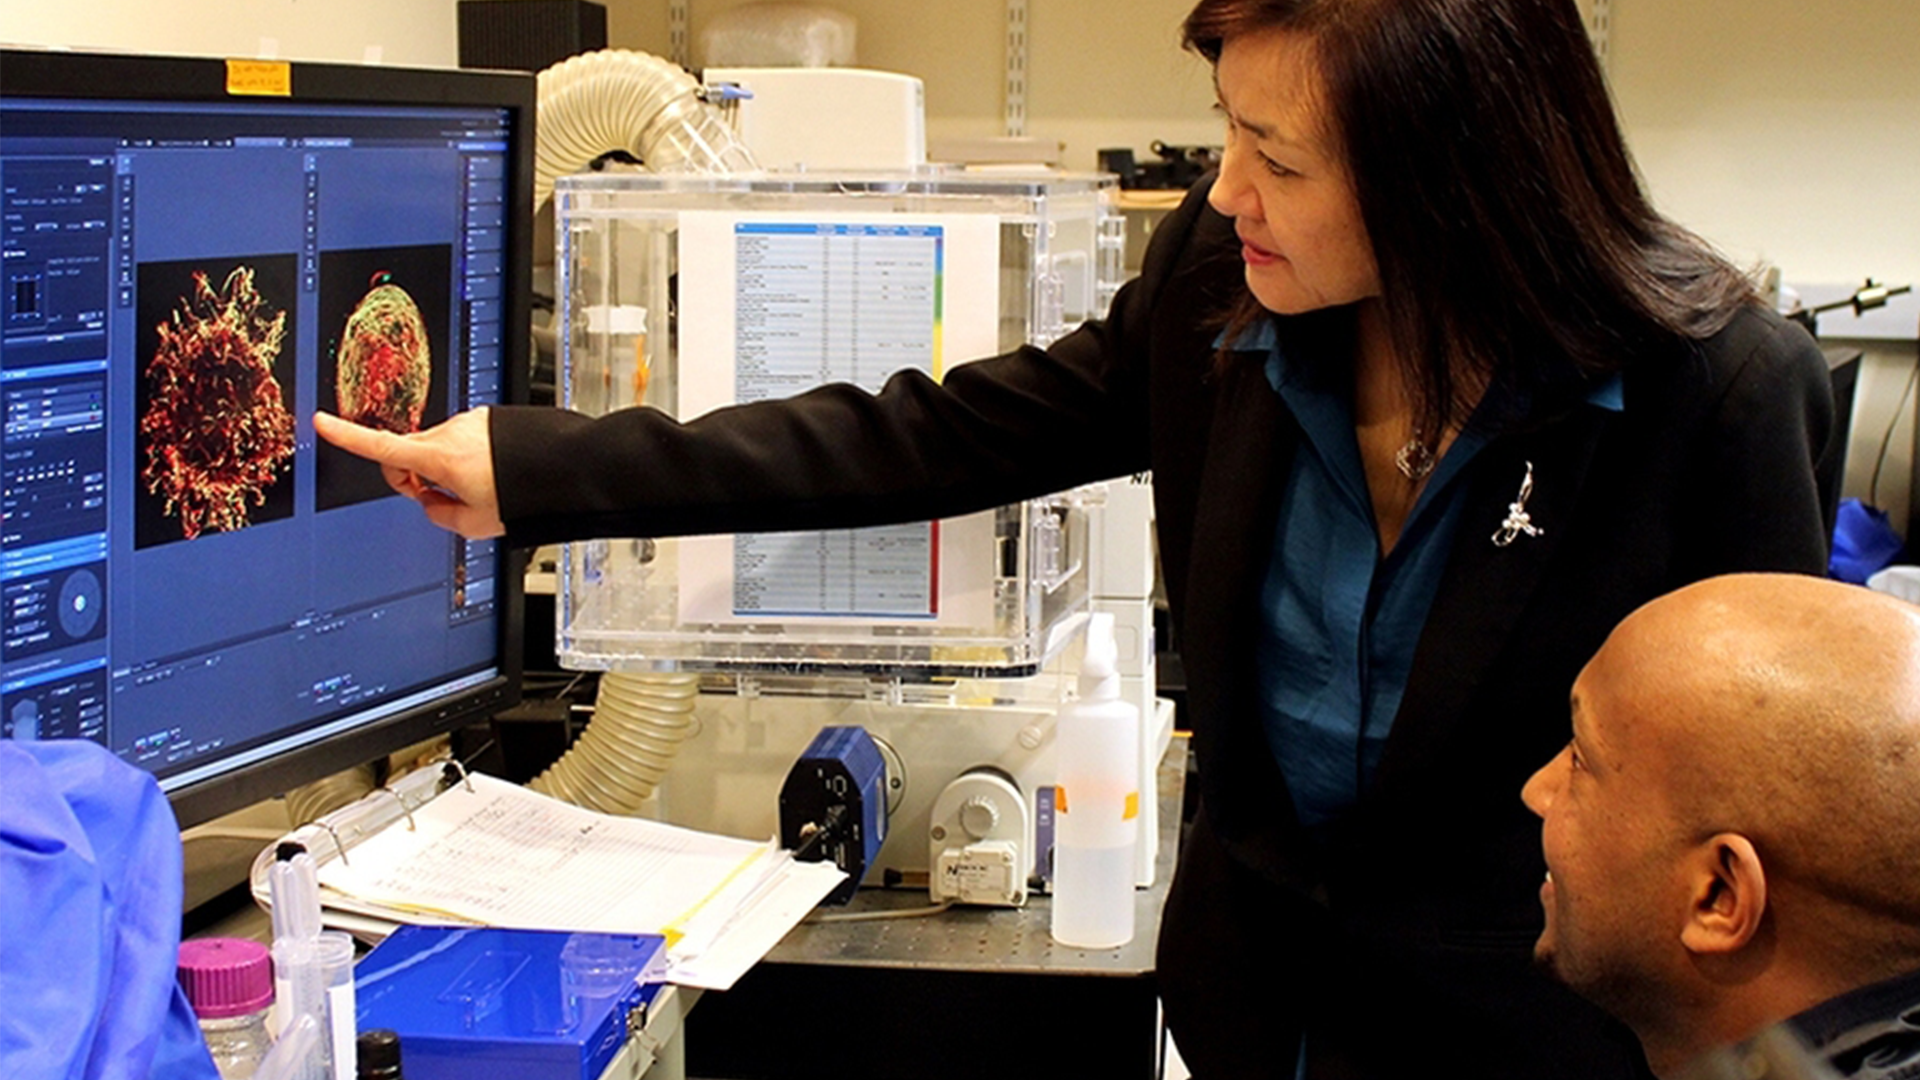 Professor Li-Huei Tsai, standing, points to a computer screen while another researcher looks on